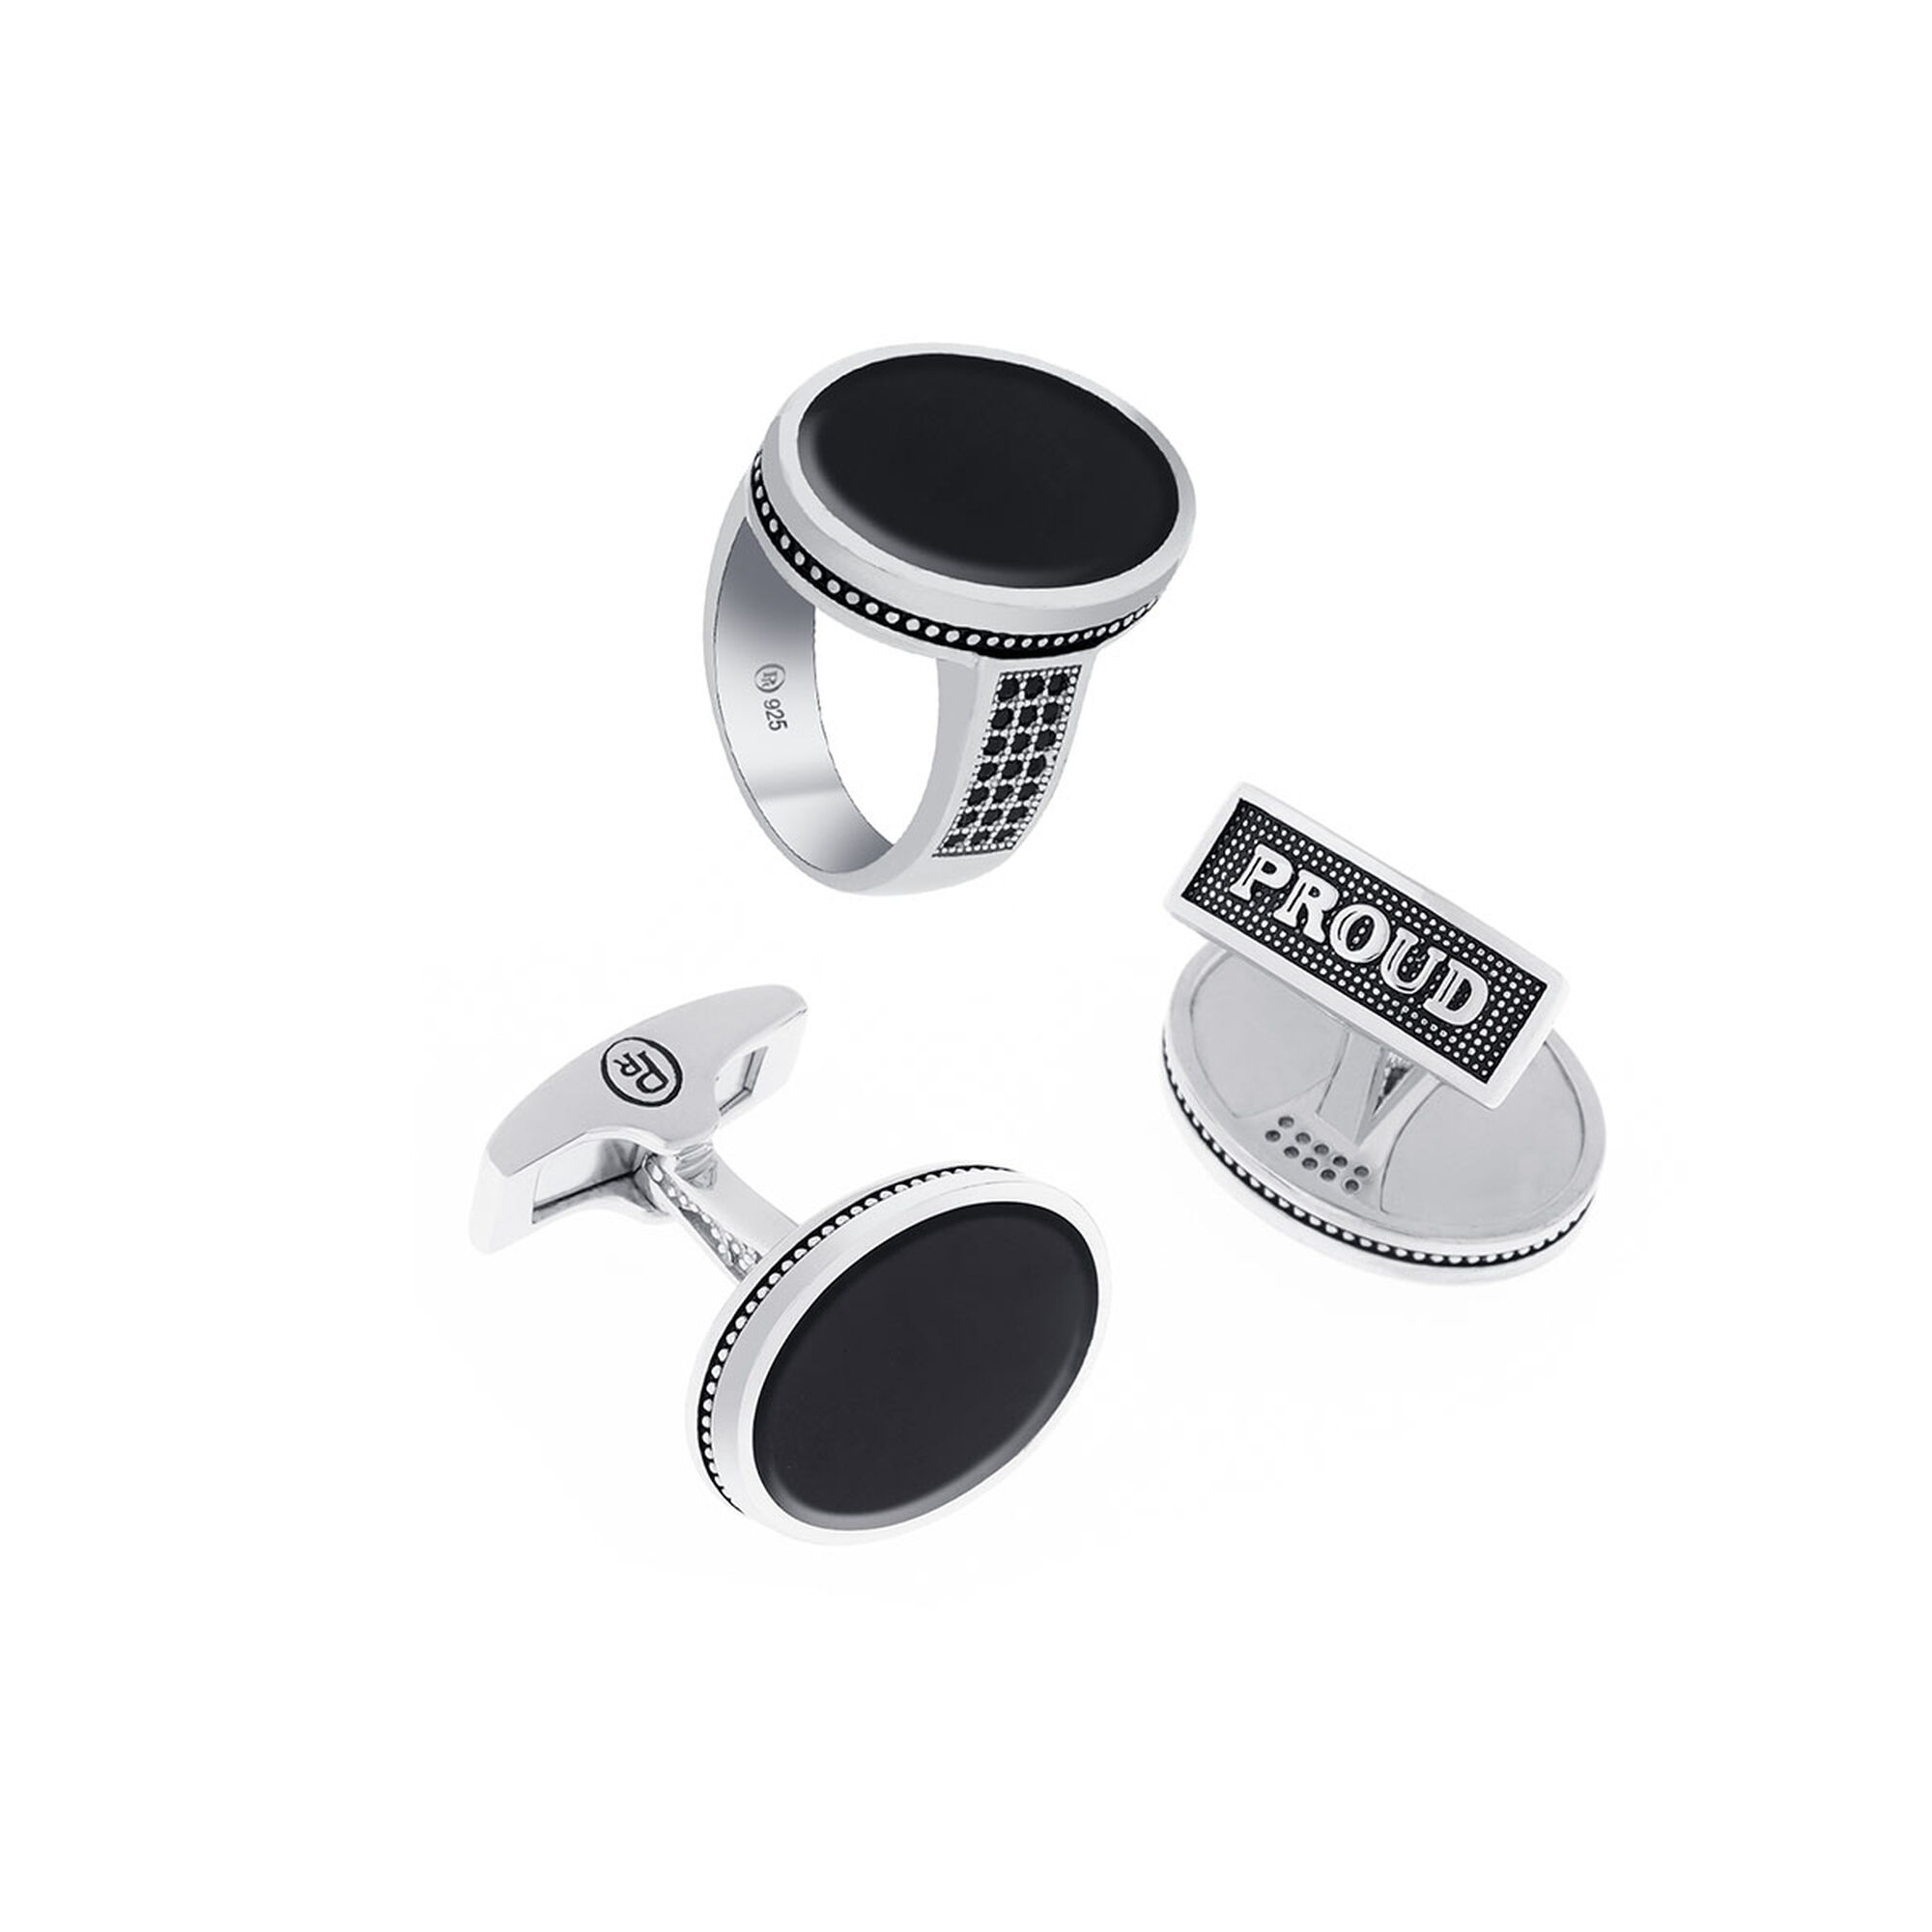 set of a silver ring and a cufflink,proud